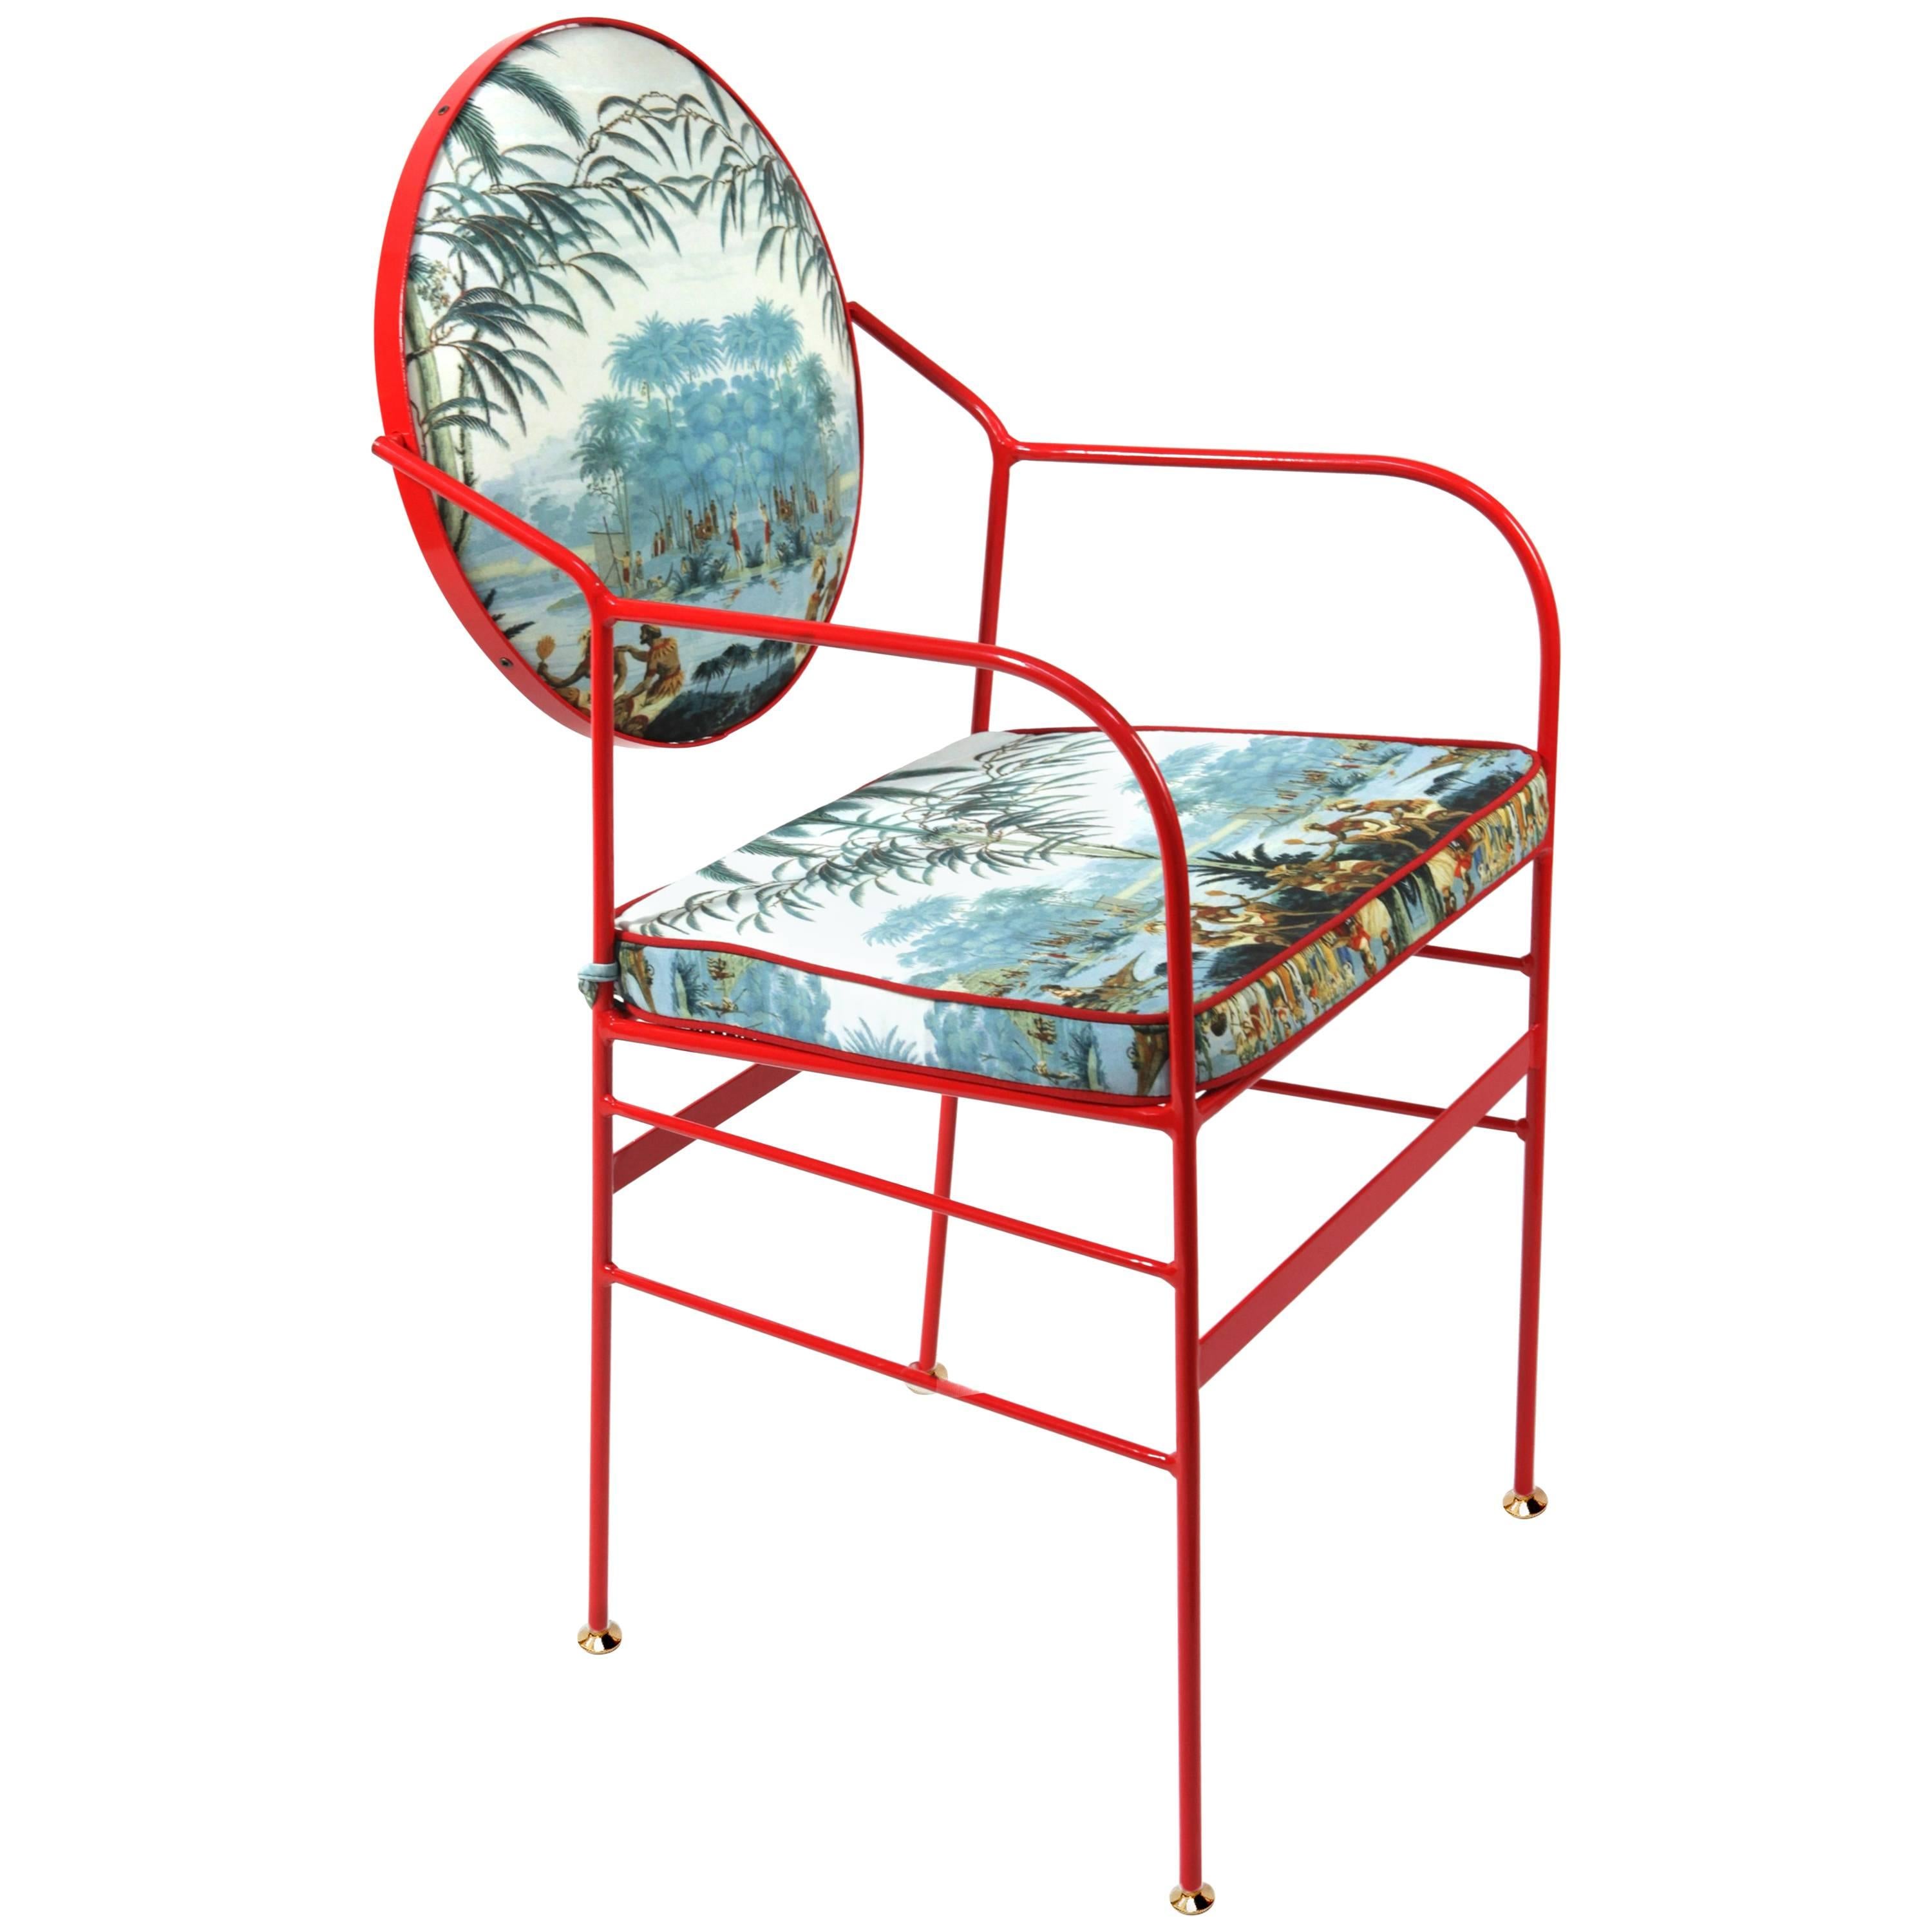 Luigina Red Escapes Chair by Sotow, Made in Italy